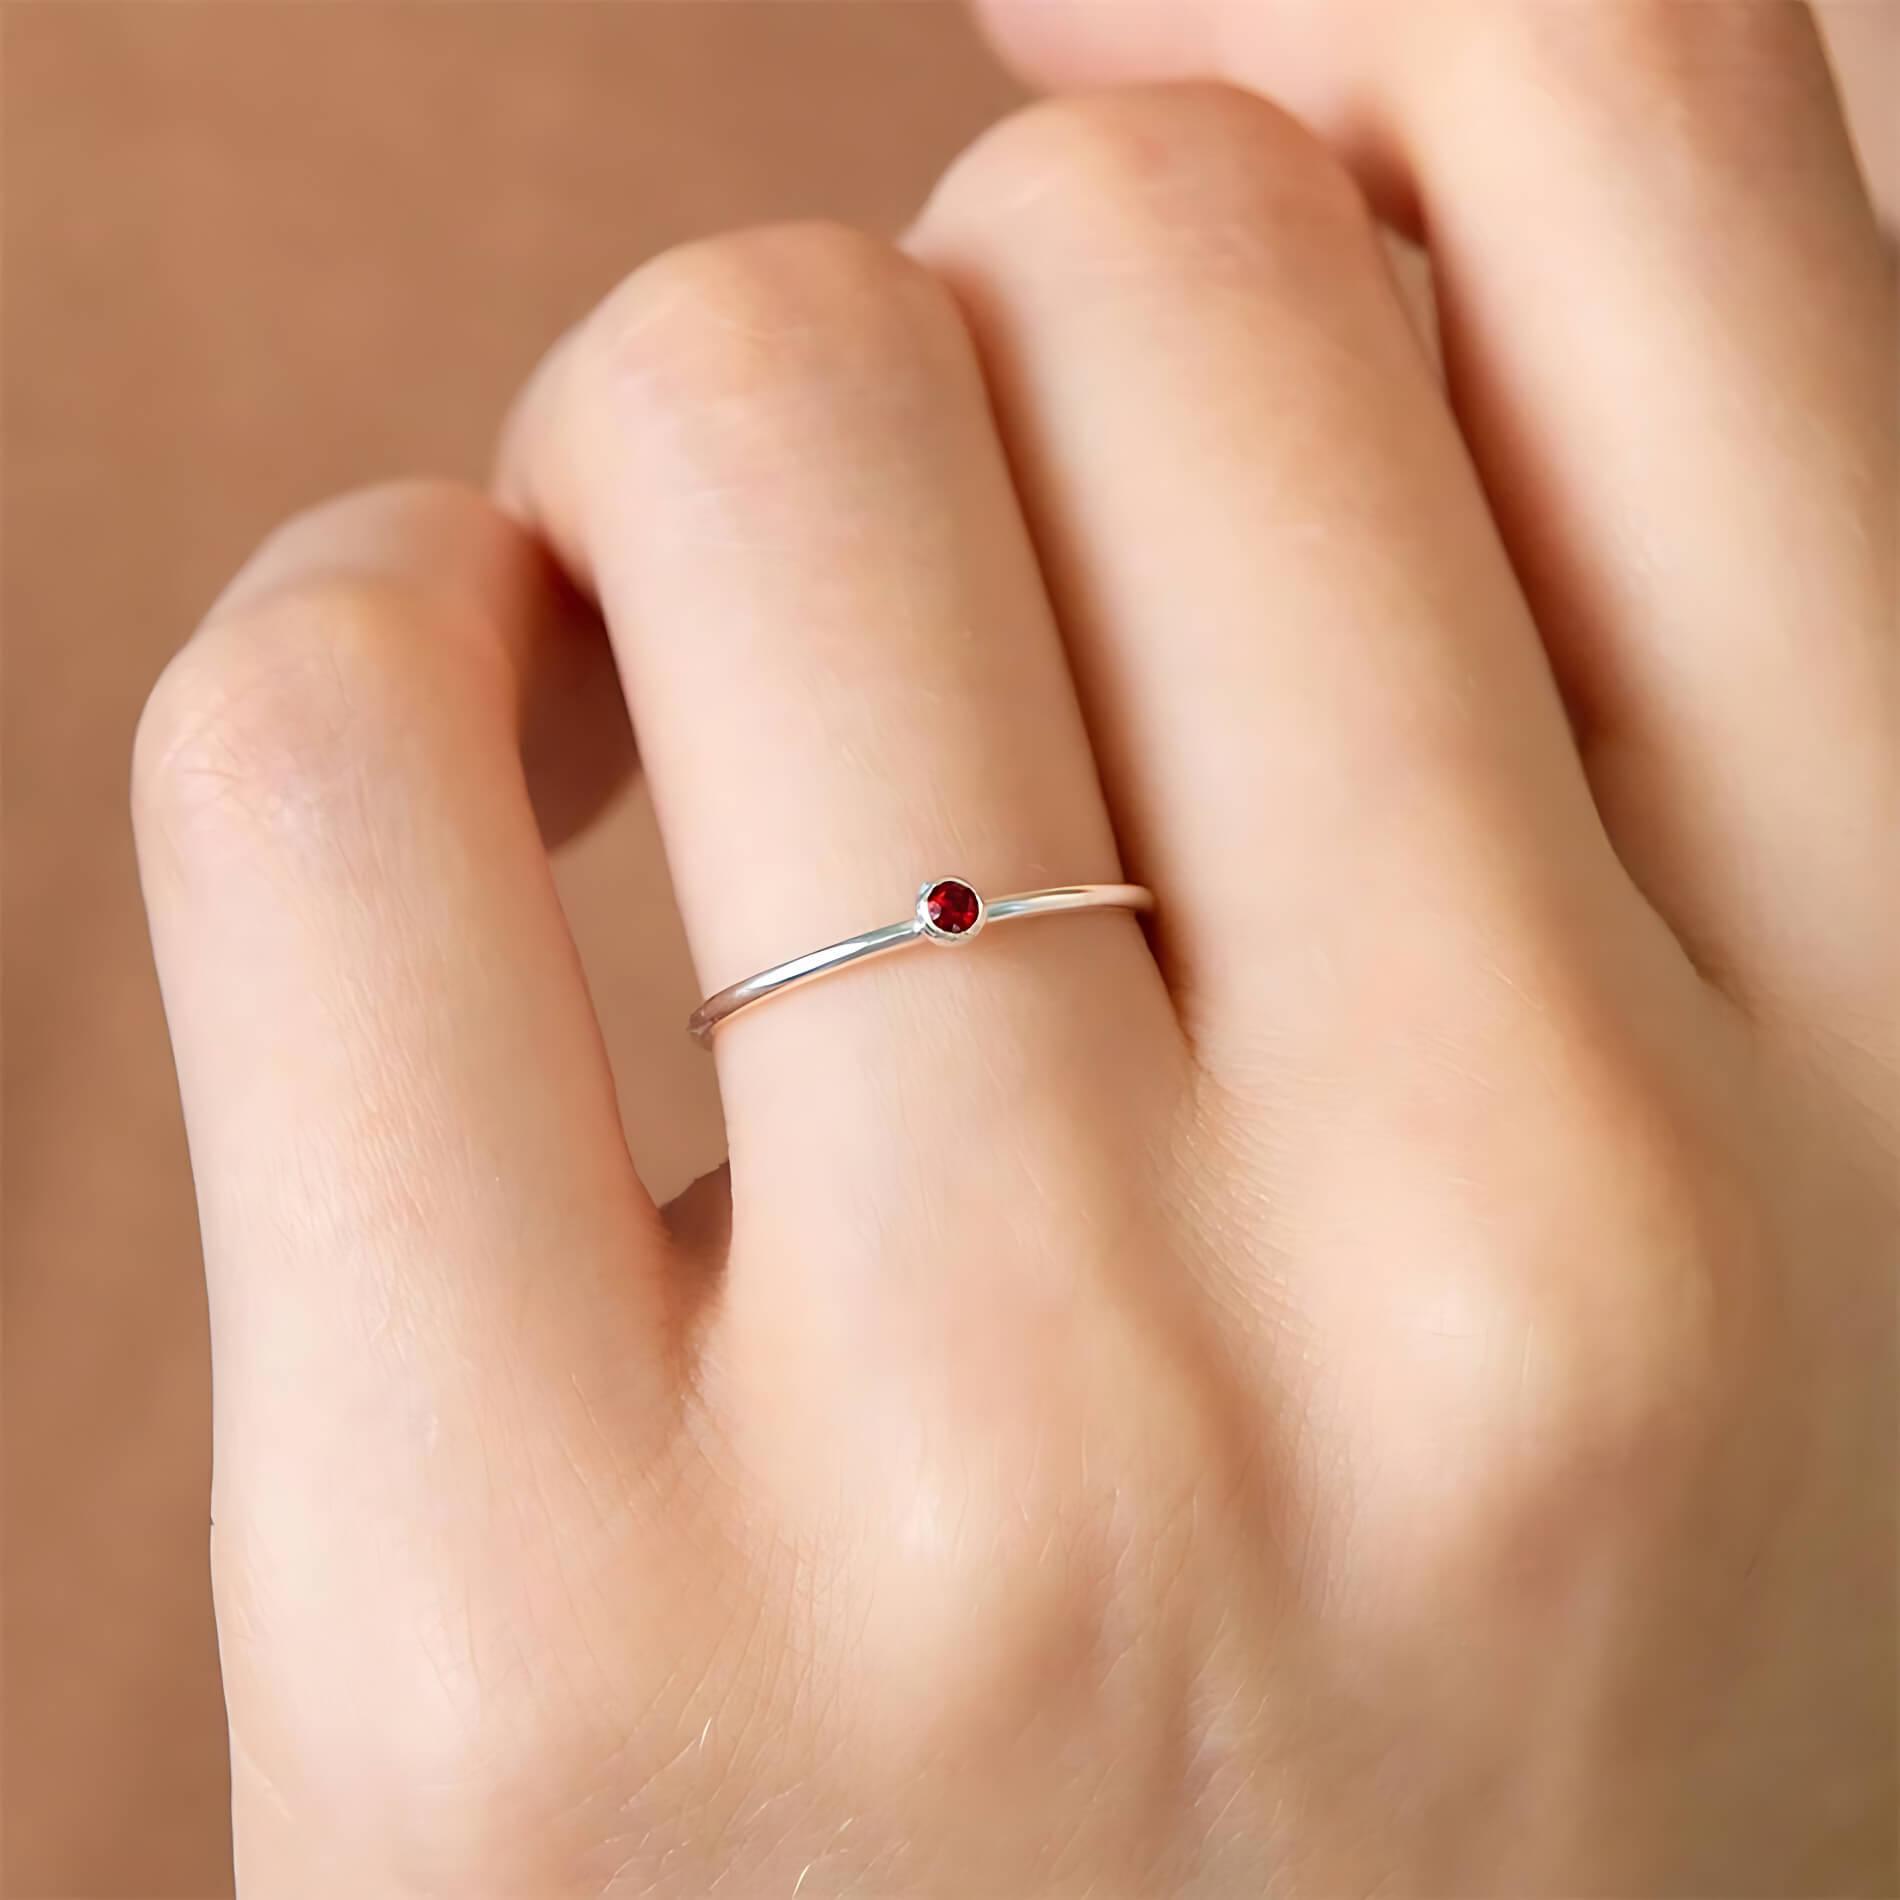 March Birthstone Cute Ring for Christmas 2023 | March Birthstone Cute Ring - undefined | Birthstone Ring, cute ring, March Birthstone, March birthstone is Aquamarine, S925 Silver Vintage Cute Ring, Sterling Silver s925 cute Ring | From Hunny Life | hunnylife.com